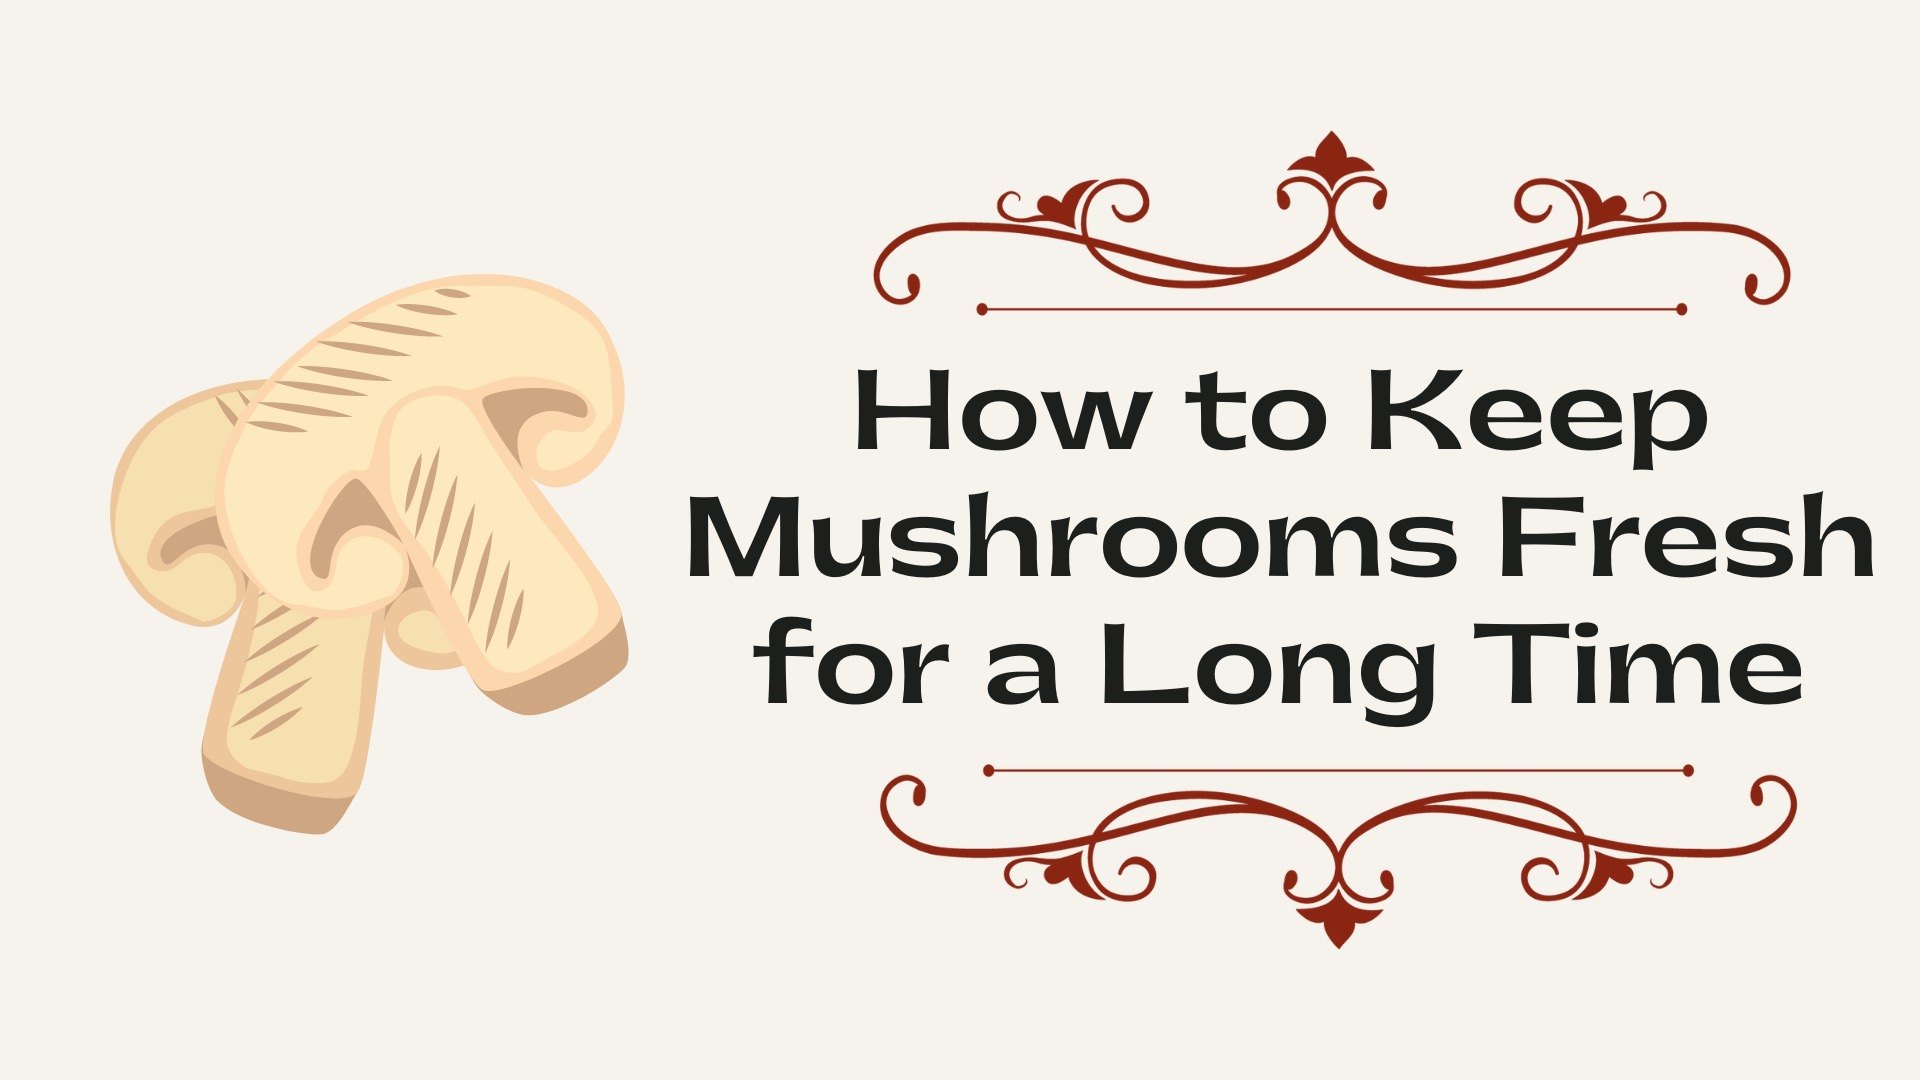 How to Keep Mushrooms Fresh for a Long Time